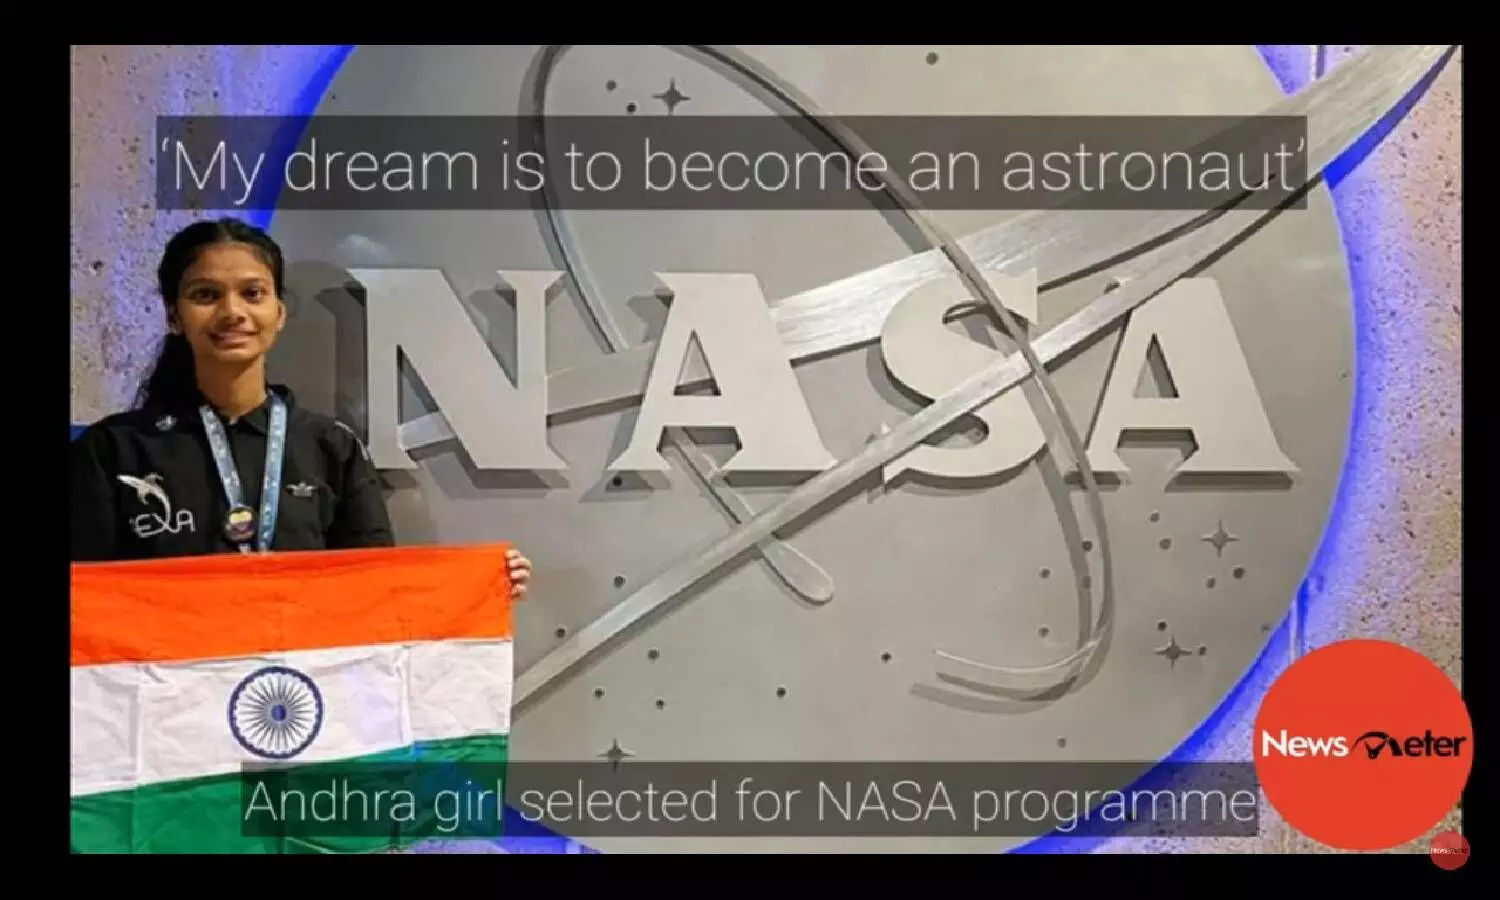 My dream is to become an astronaut: Andhra girl Jahnavi Dangeti selected for NASA programme